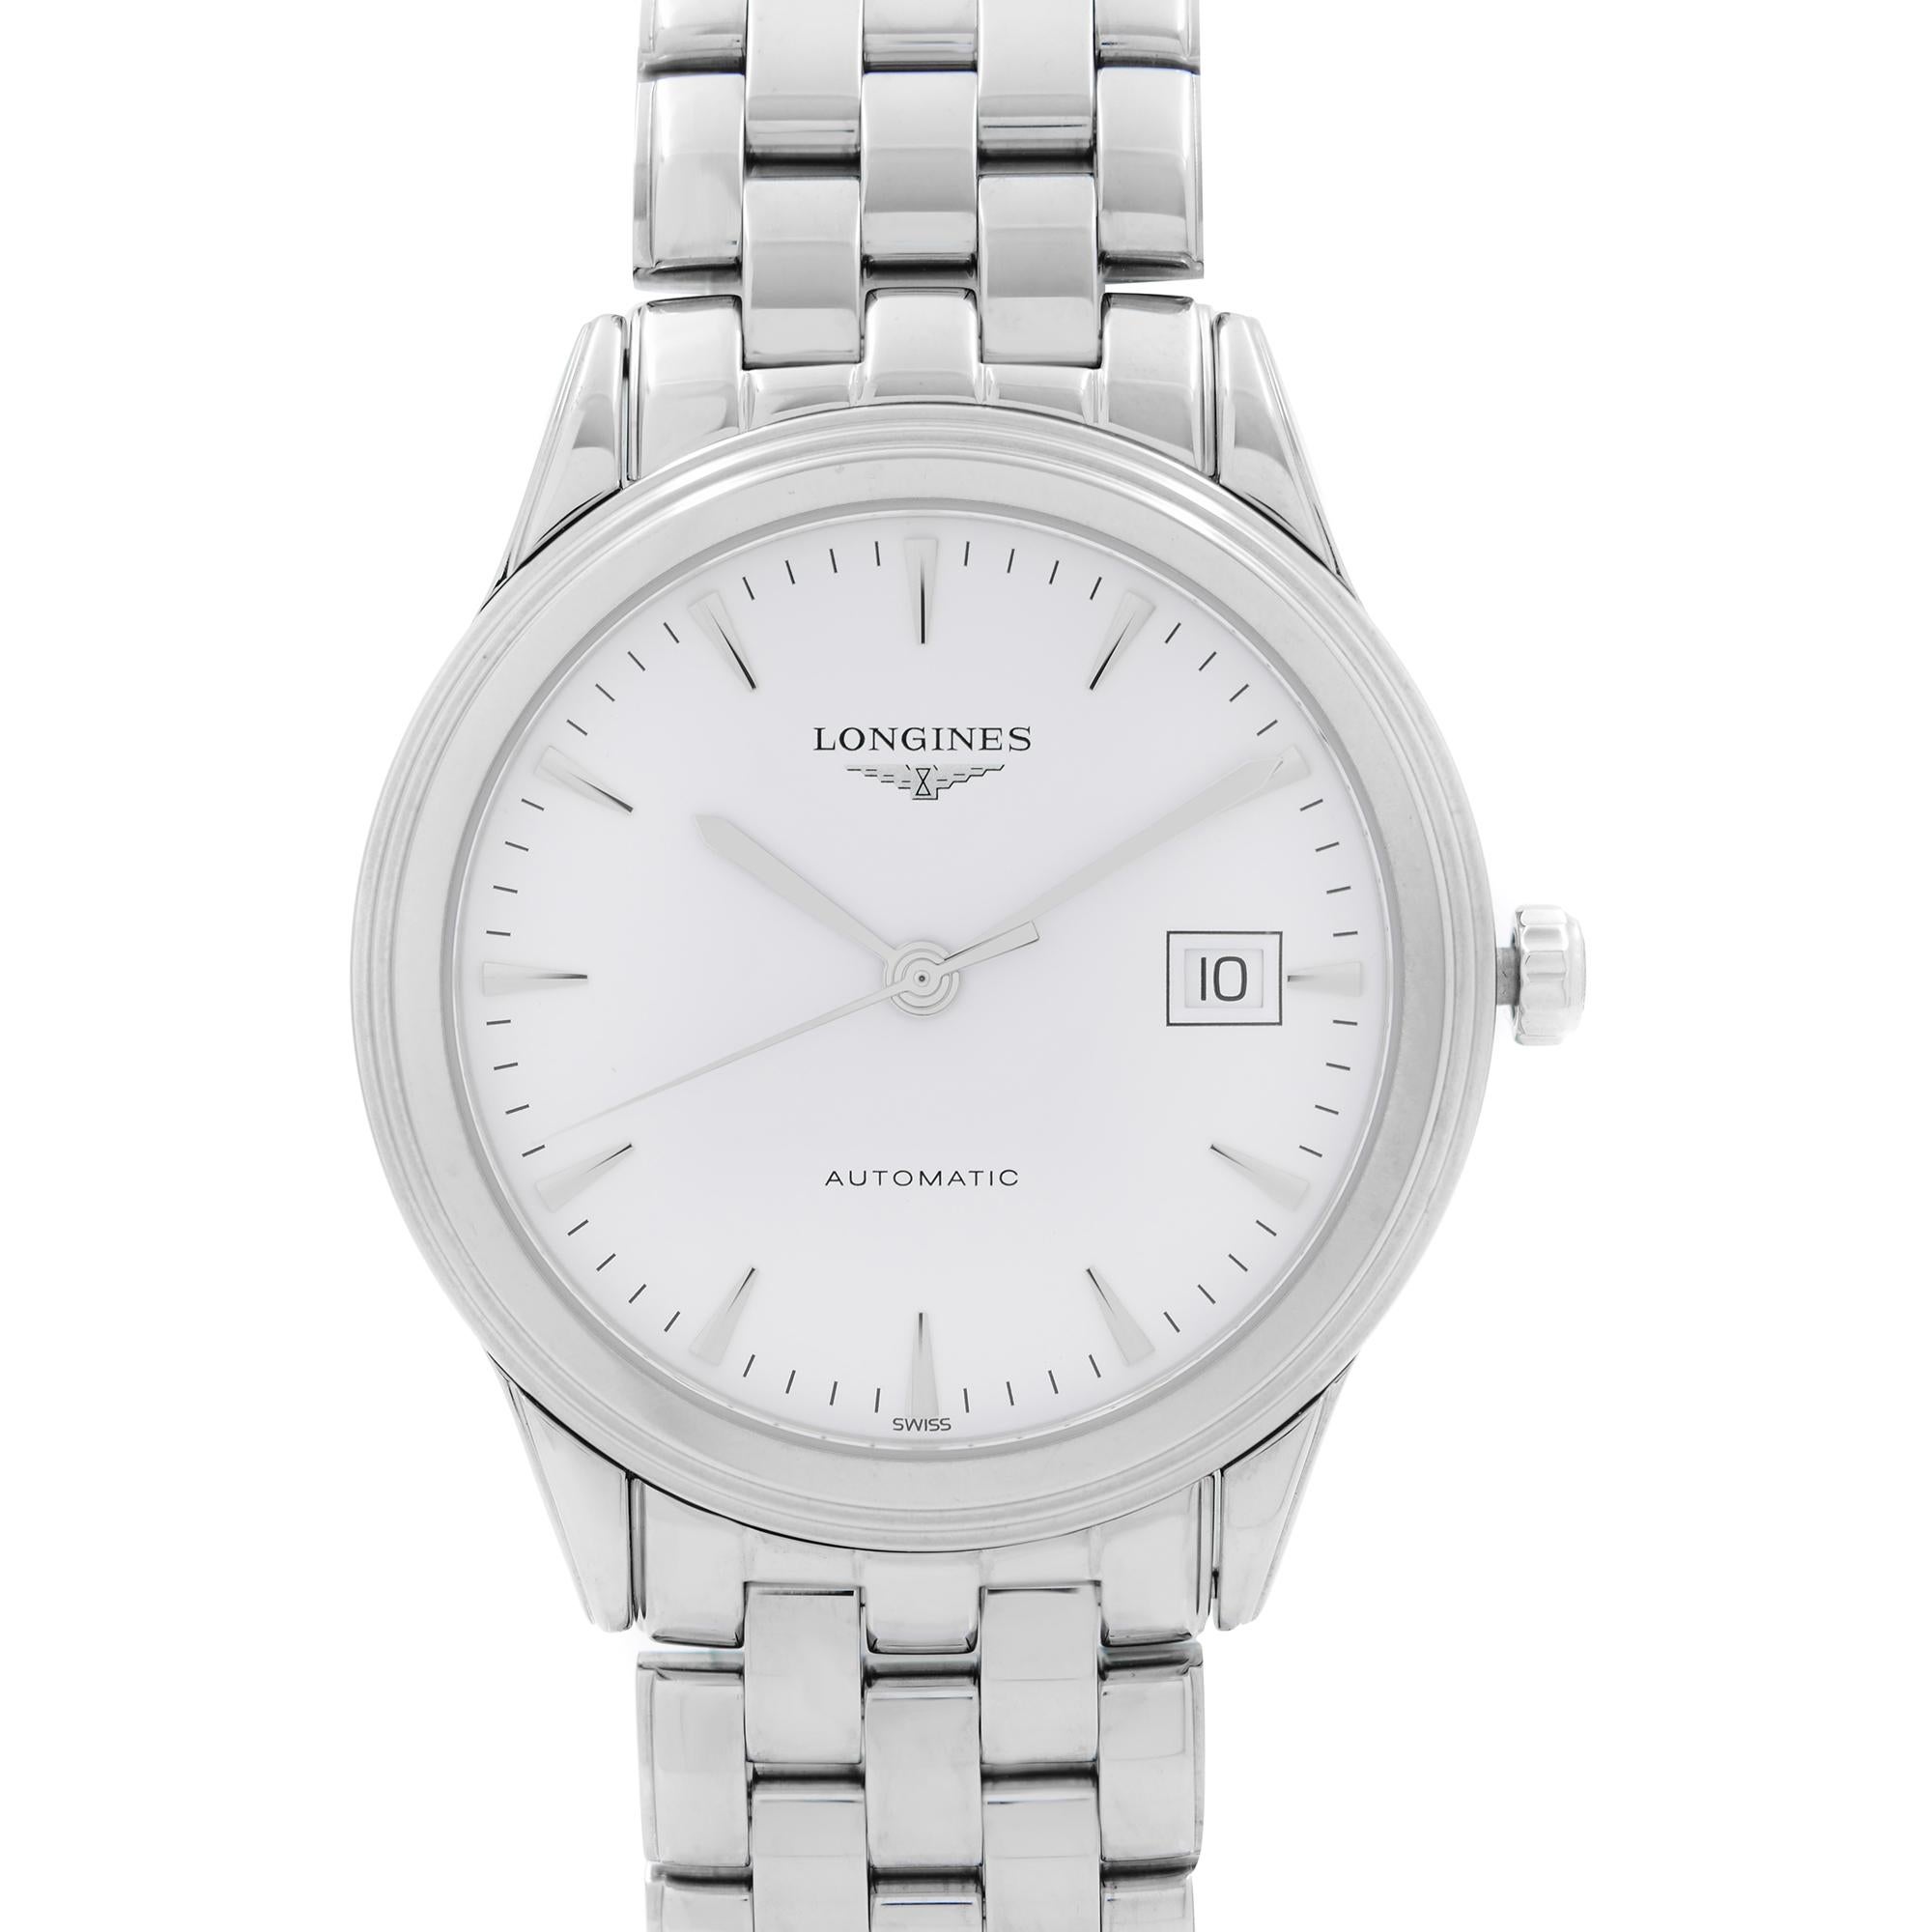 Display Model Longines Flagship Stainless Steel White Dial Automatic Men's Watch L4.874.4.12.6. This Beautiful Timepiece Features: Stainless Steel Case & Bracelet, Fixed Stainless Steel Bezel. White Dial with Silver-Tone Hands and Index Hour